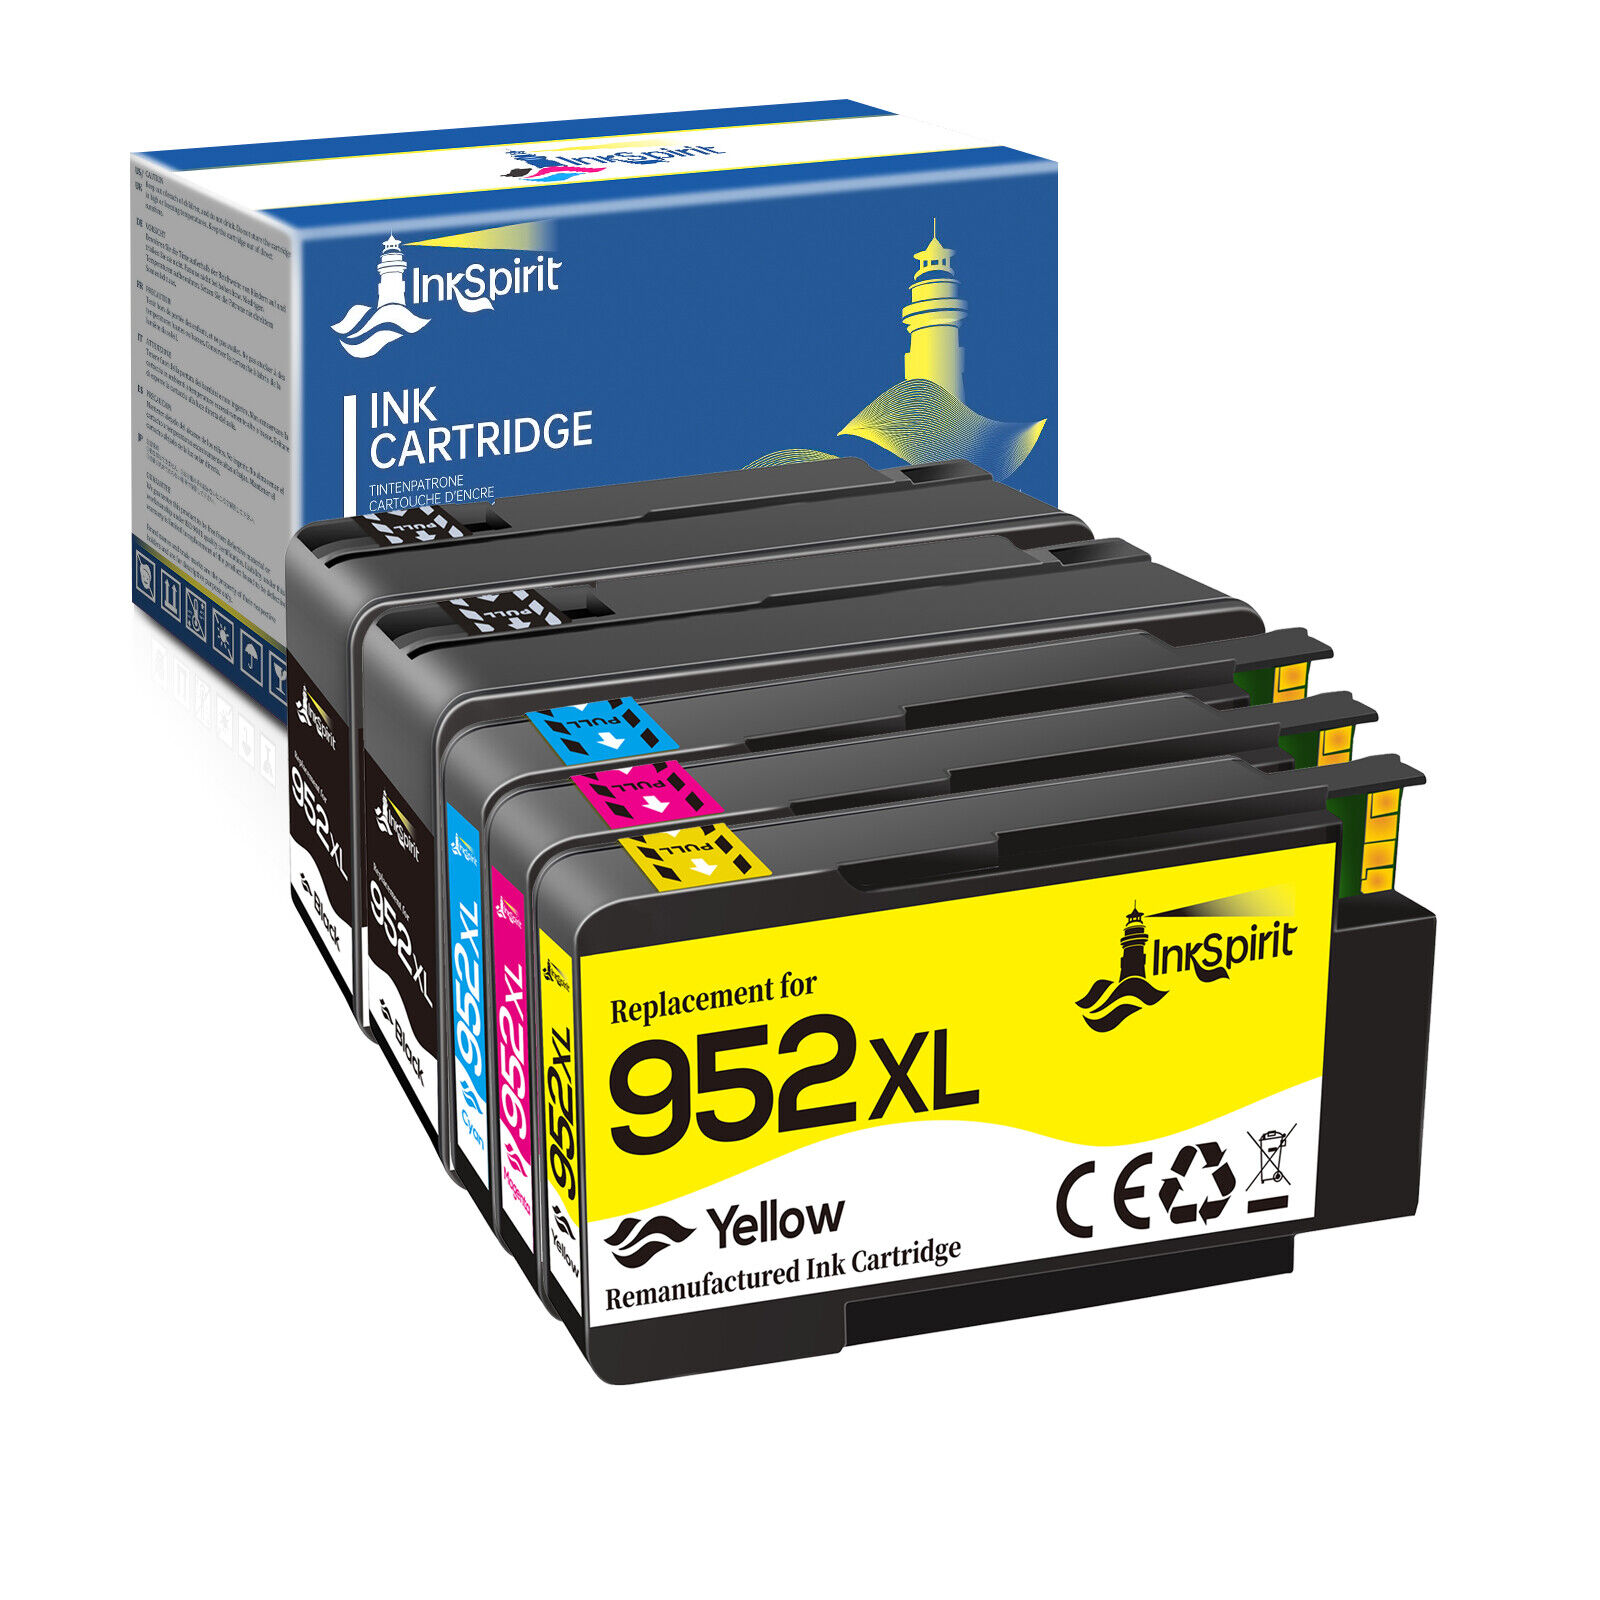 5 Pack 952XL Ink Cartridges for HP 952 XL OfficeJet Pro 7720 7740 8216 8700 8710